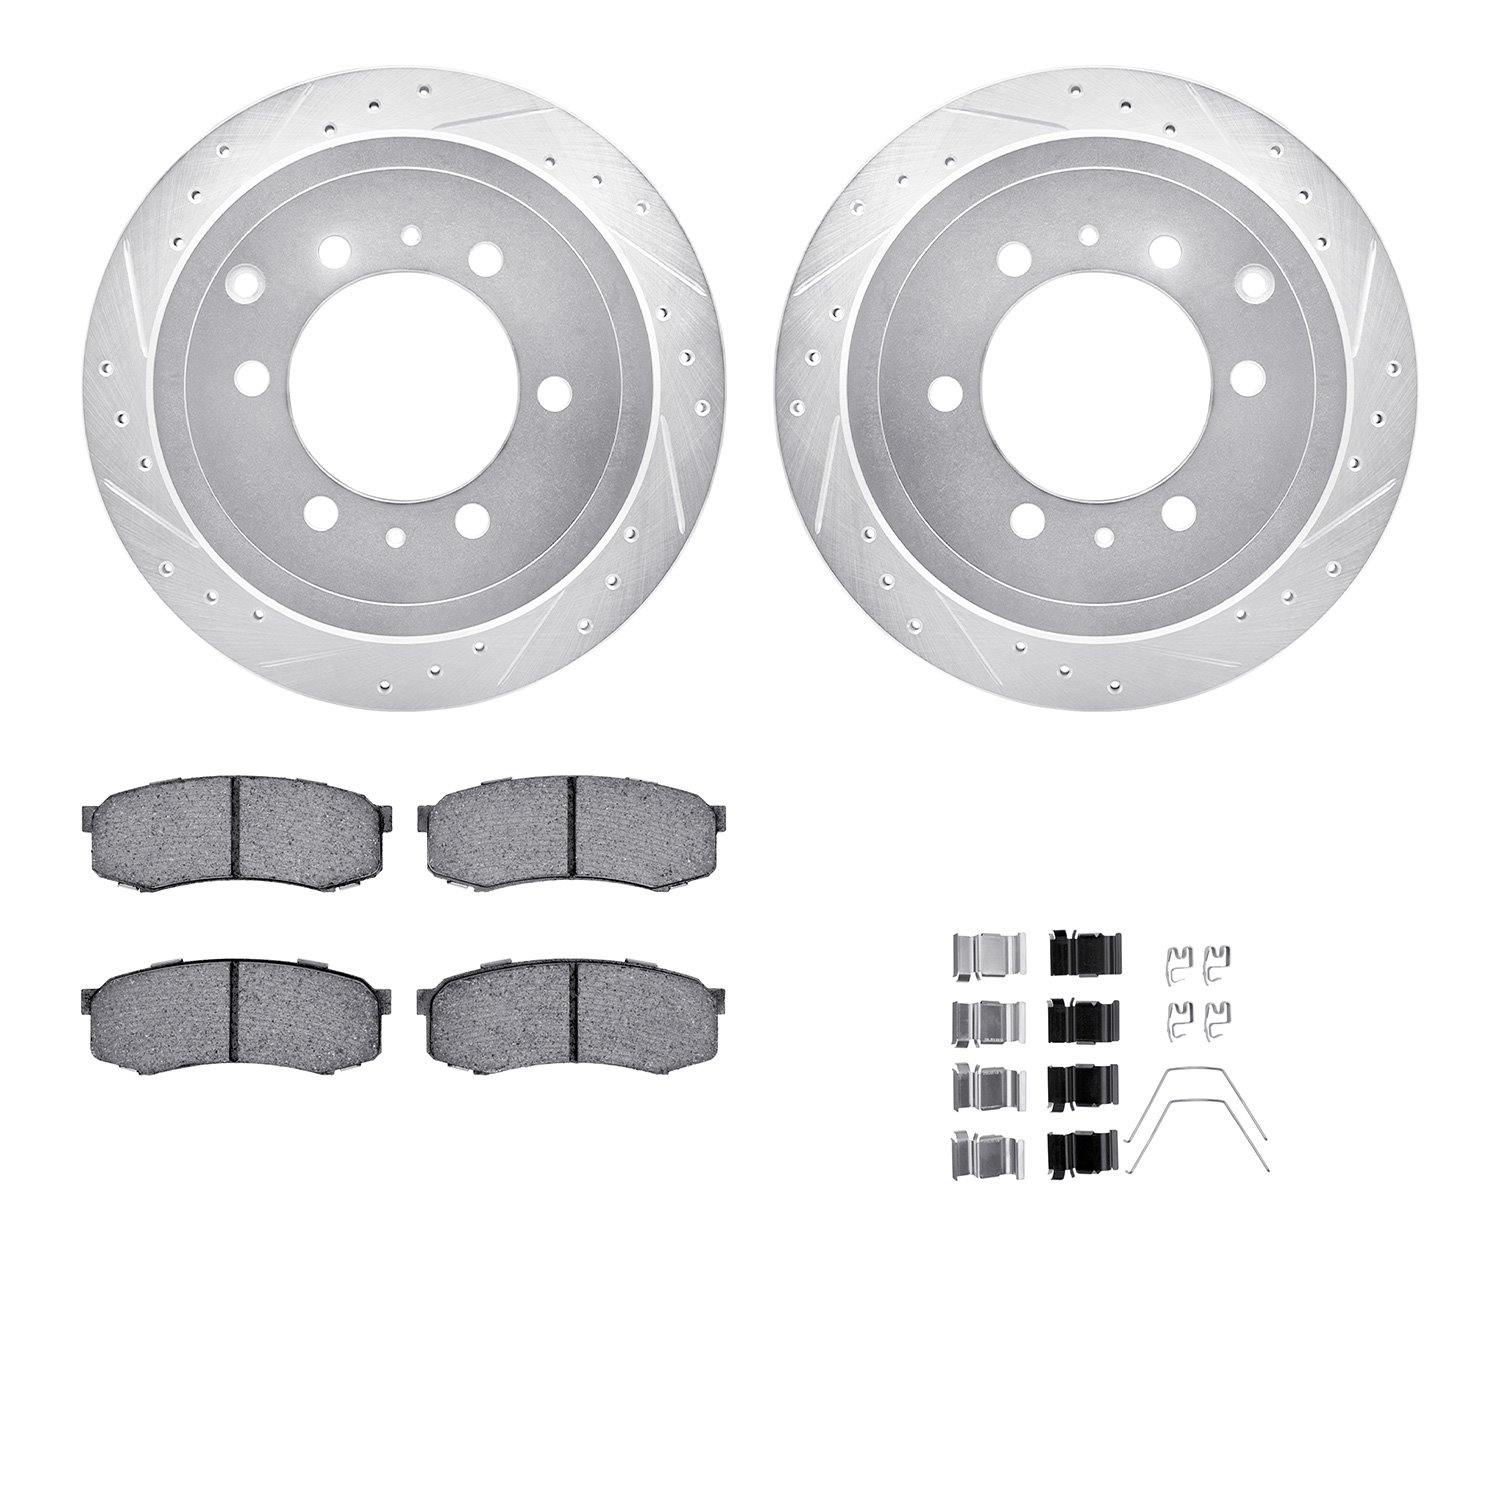 7412-76009 Drilled/Slotted Brake Rotors with Ultimate-Duty Brake Pads Kit & Hardware [Silver], 1993-1997 Lexus/Toyota/Scion, Pos